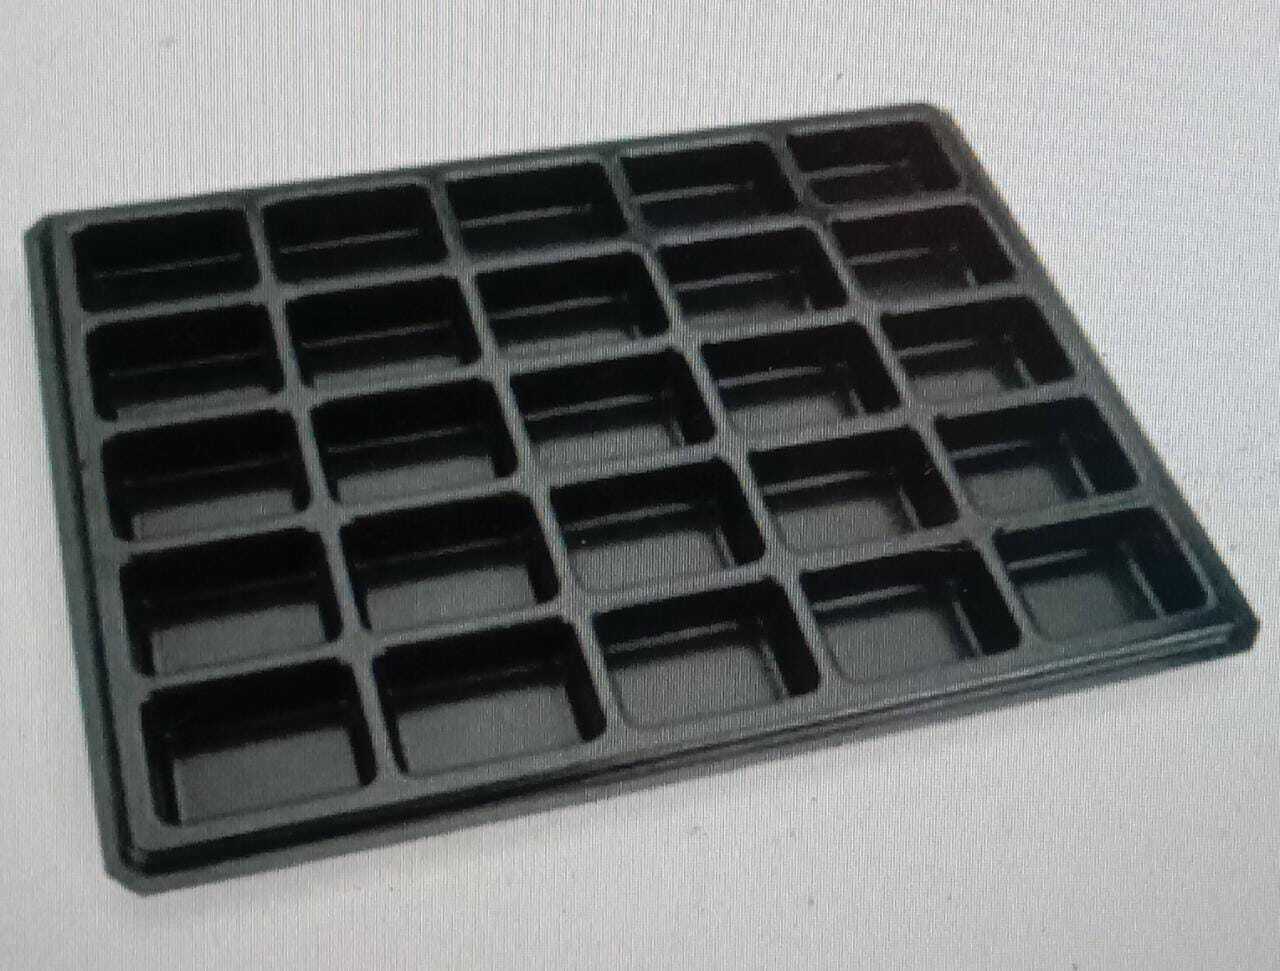 Plastic Tool Forming Packaging Tray